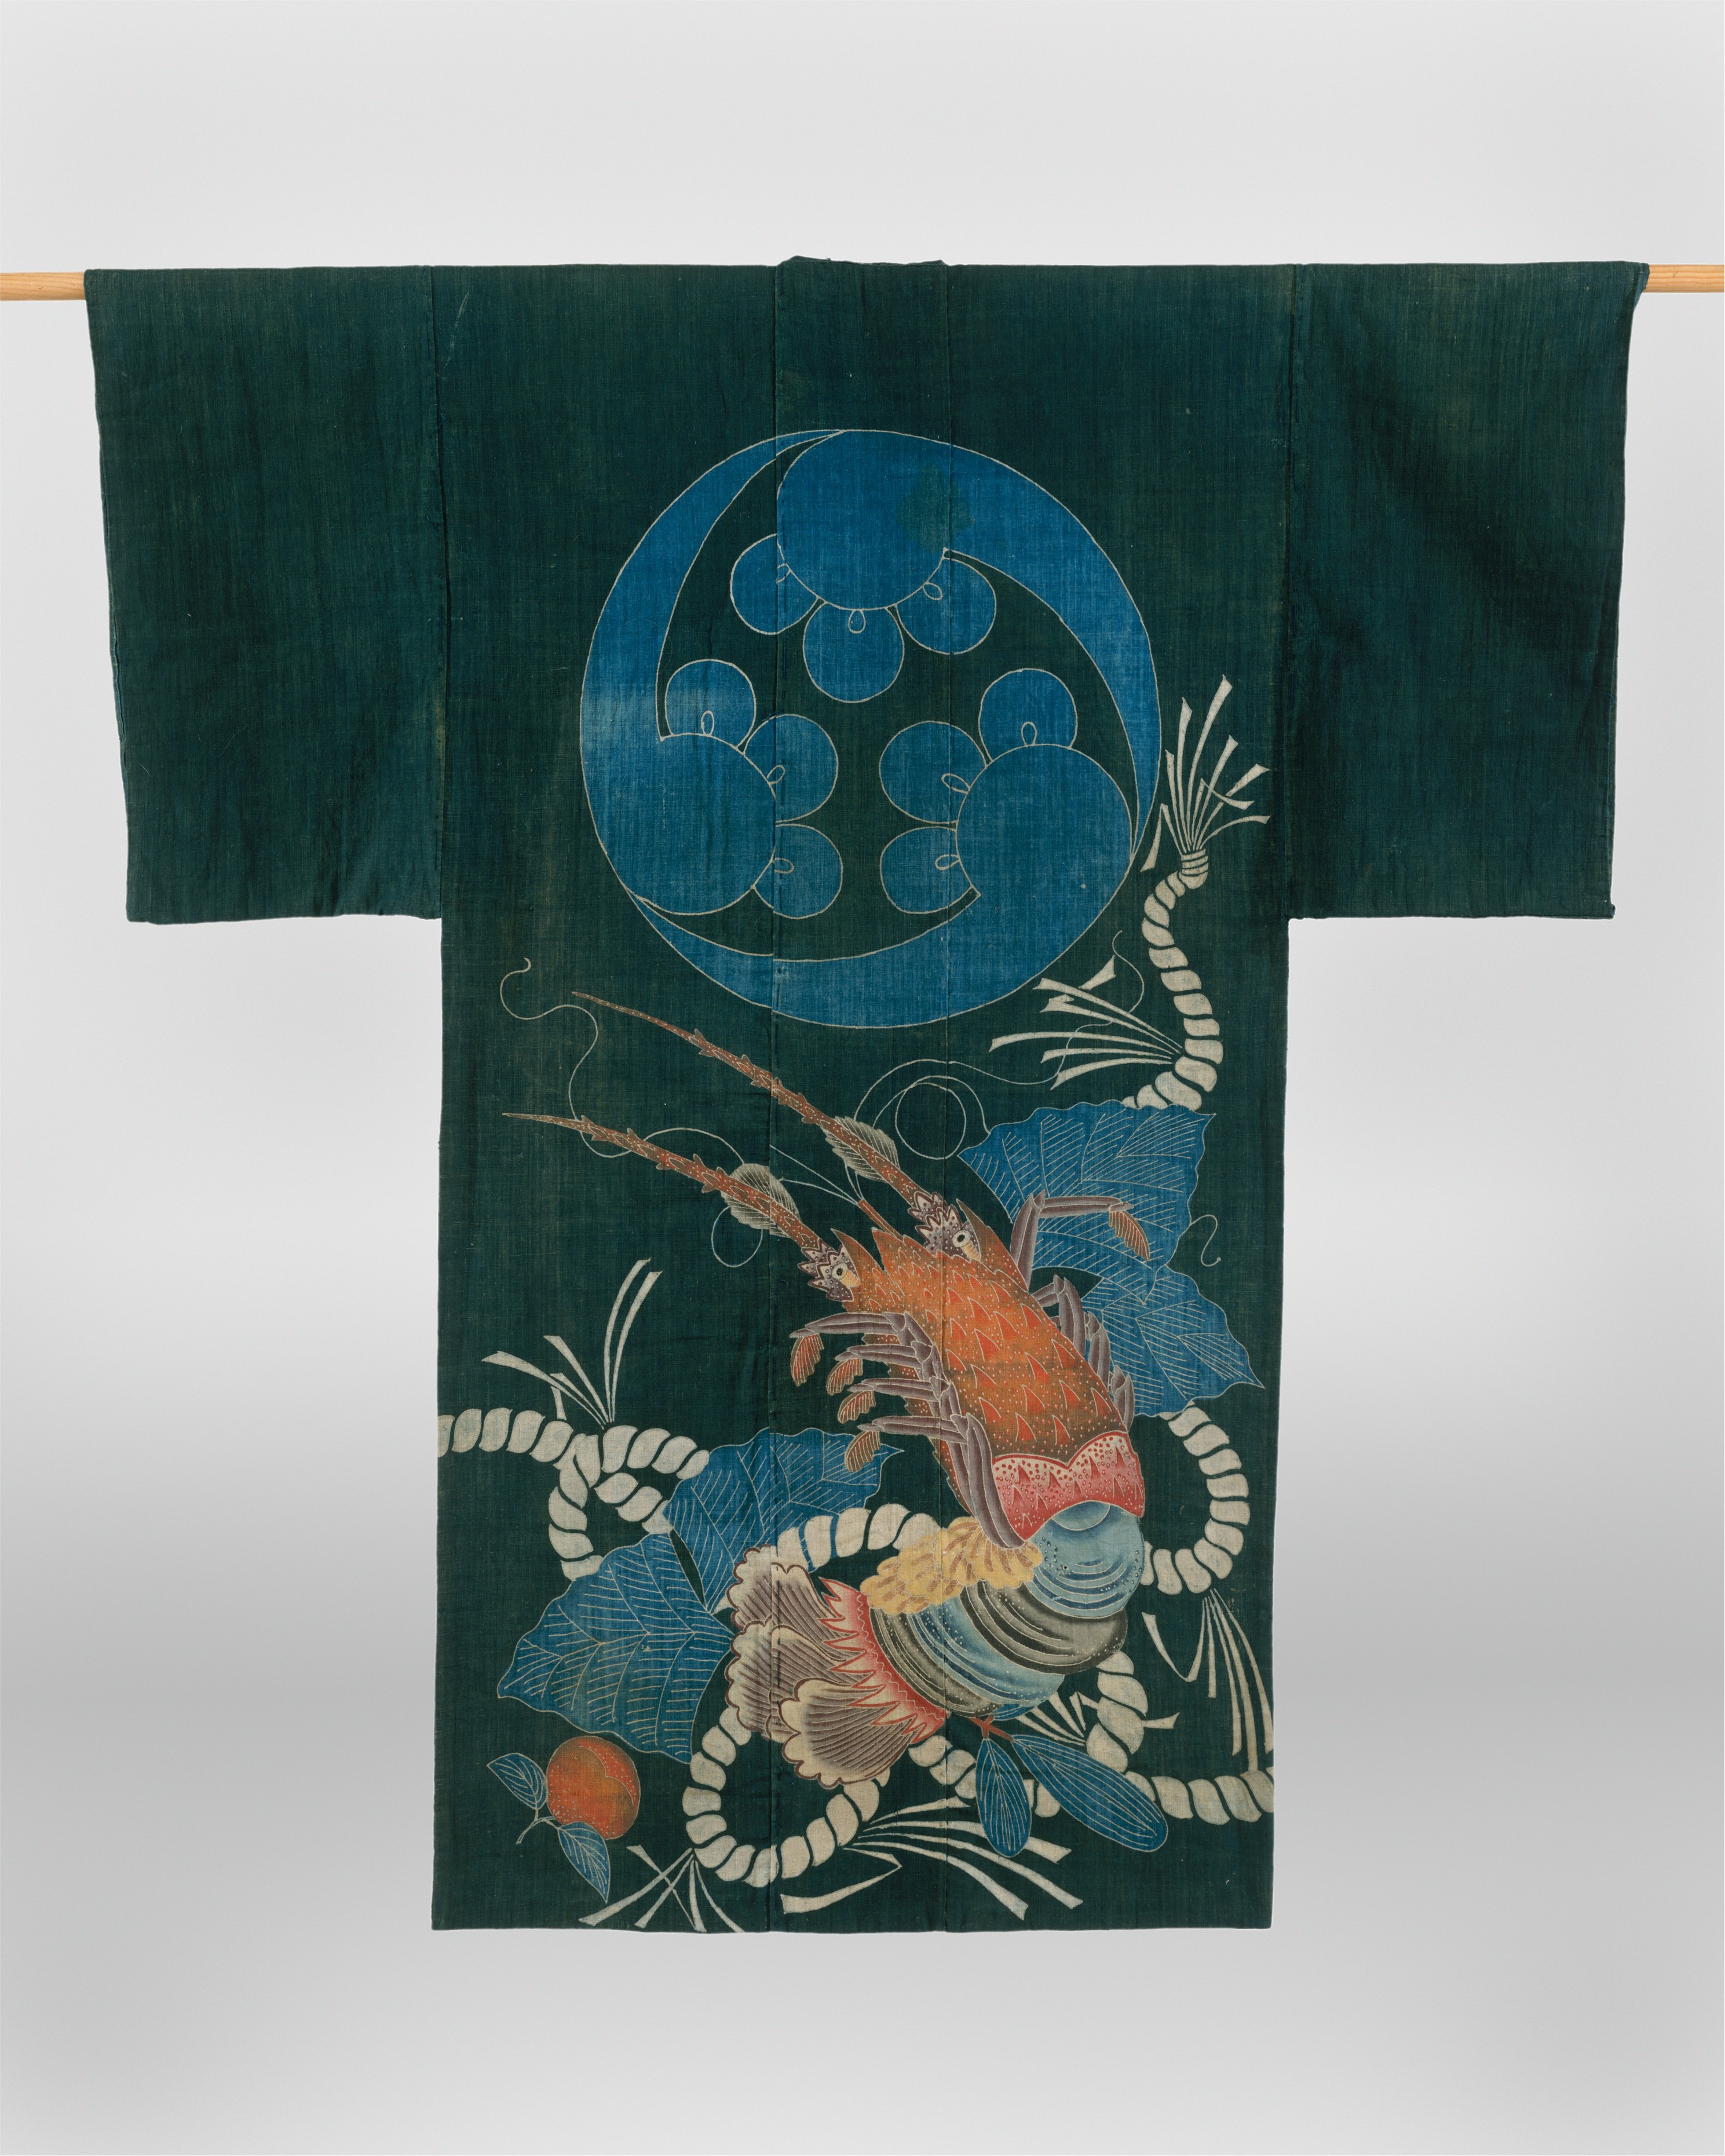 Kimono-Shaped Coverlet (Yogi) with Lobster and Crest | Japan | Meiji period  (1868–1912) | The Metropolitan Museum of Art